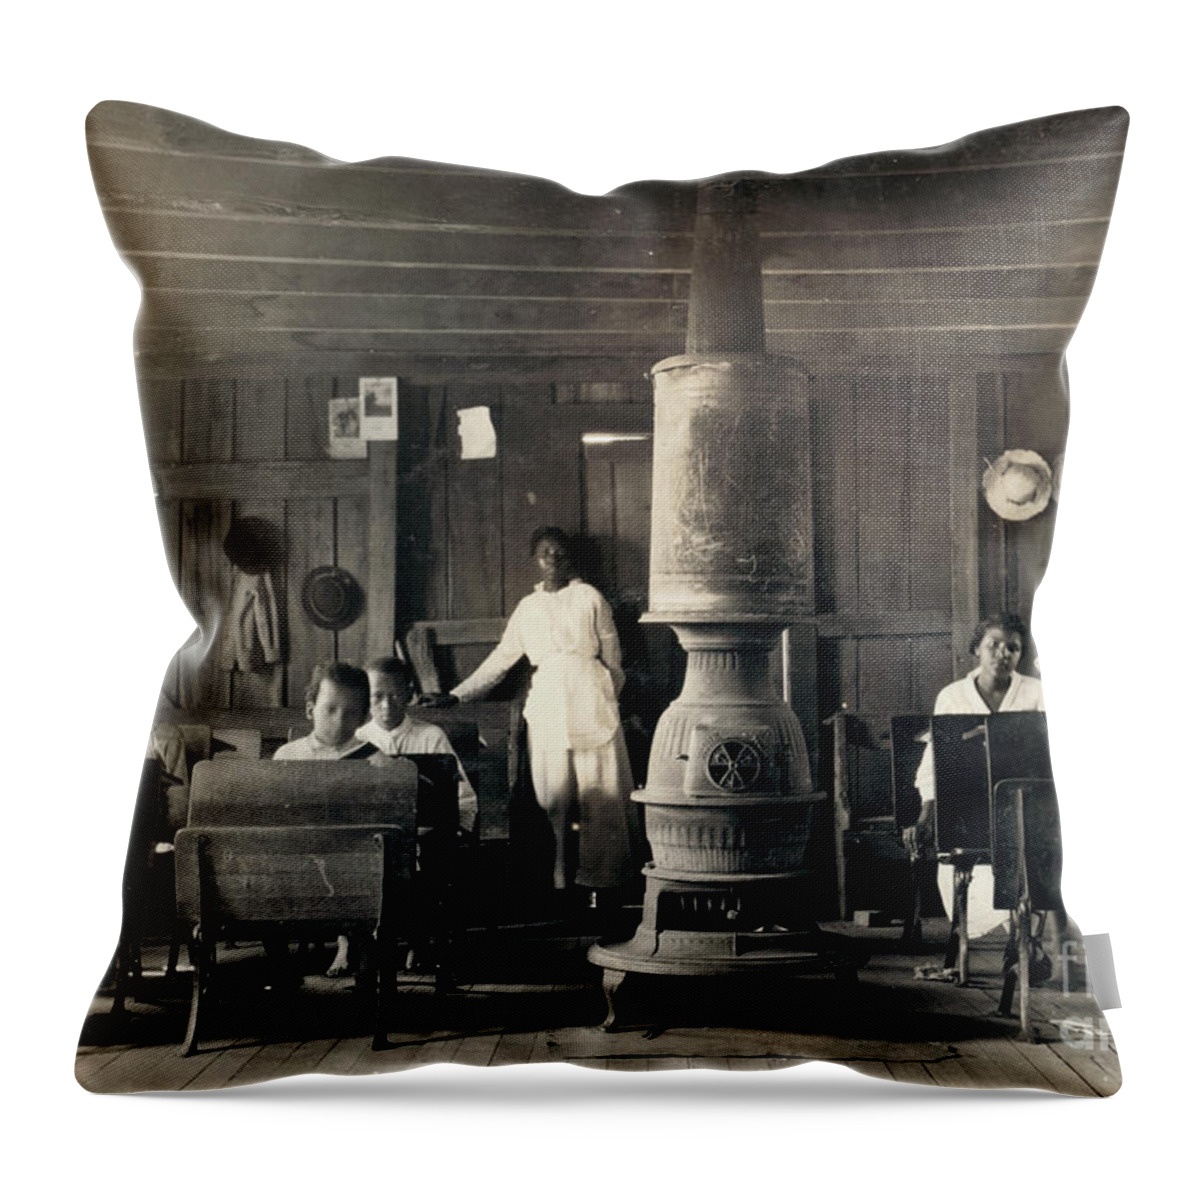 1916 Throw Pillow featuring the photograph Segregated School, 1916 by Granger